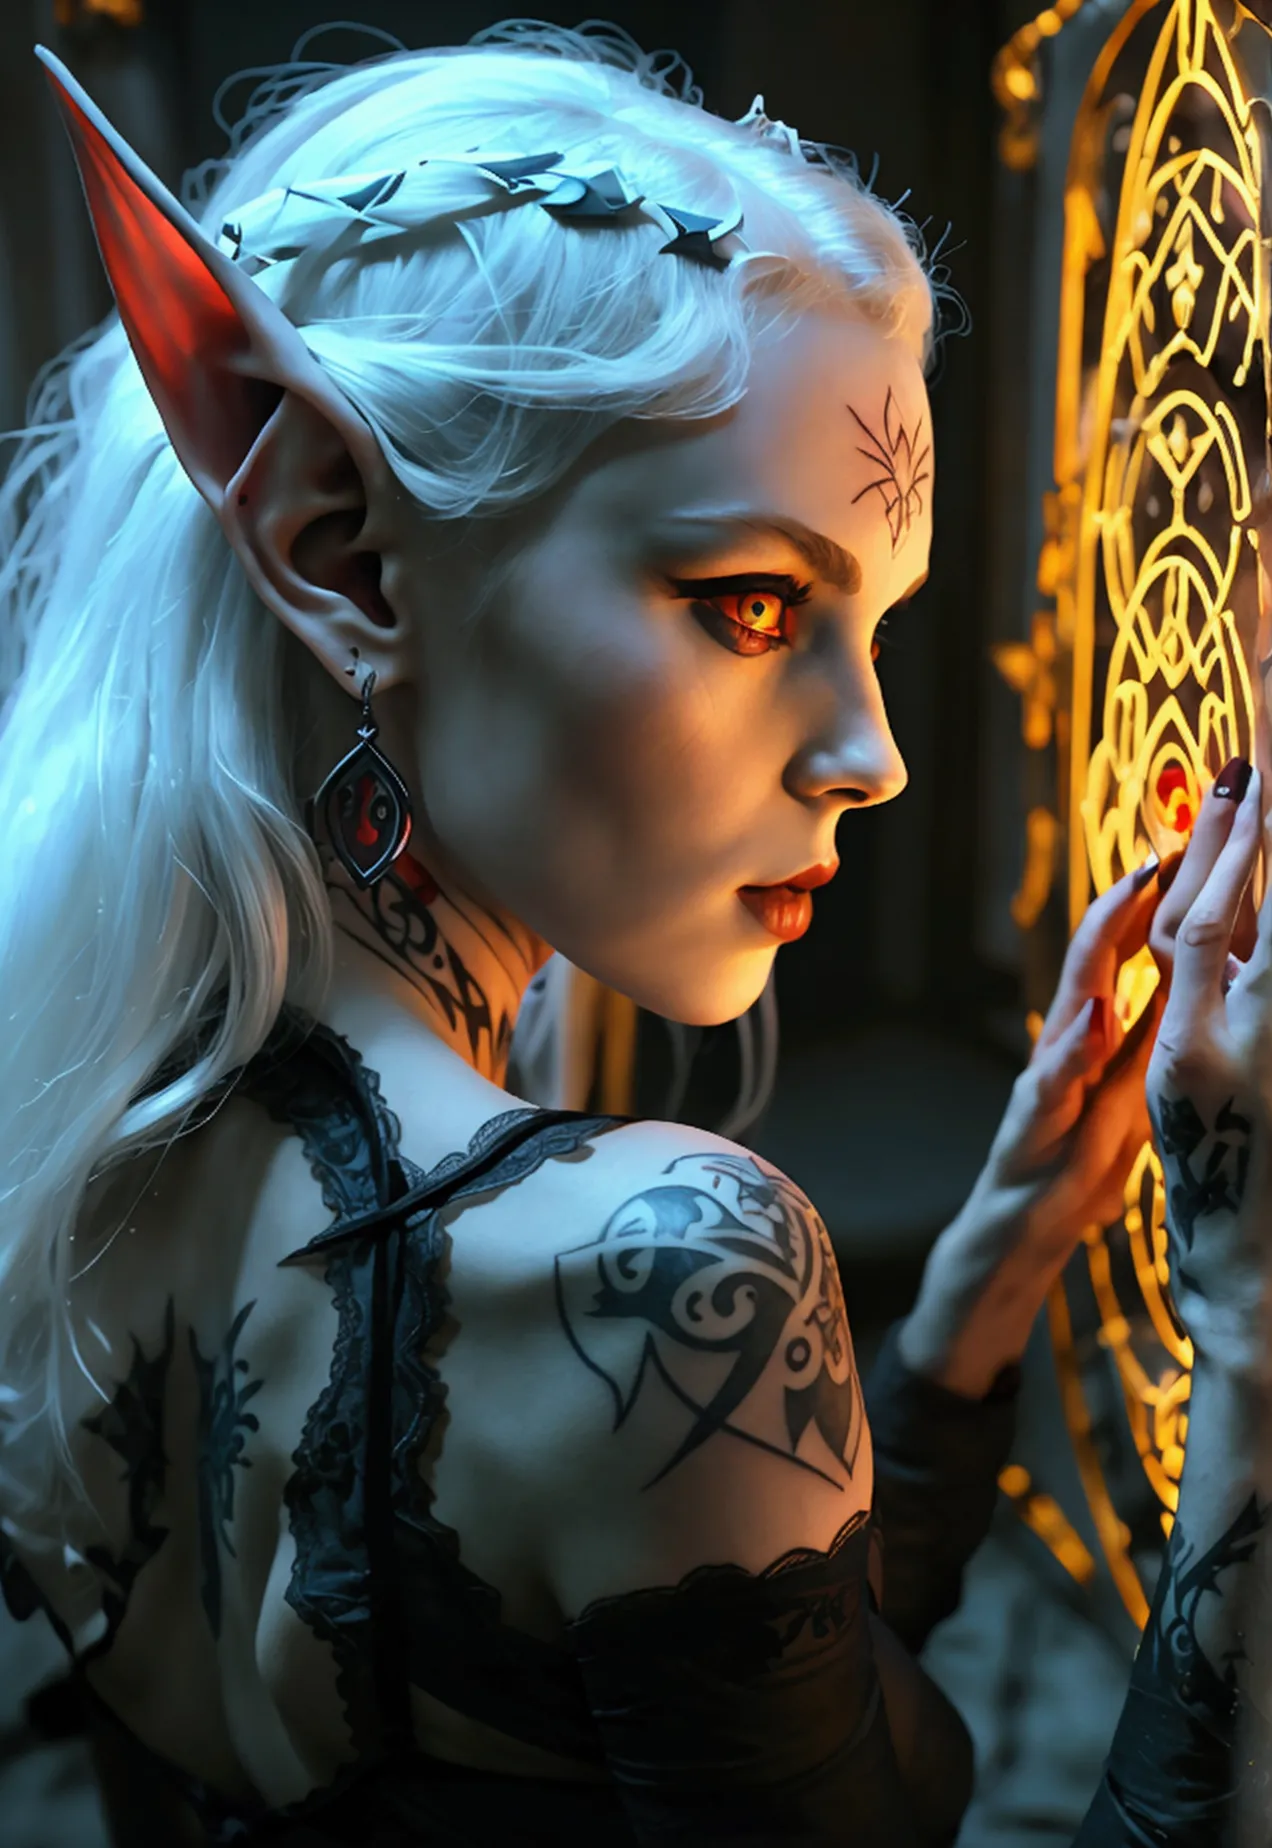 A dark elf (cute woman, pale white skin, large pointy ears, blood red eyes, large evil tattoos, sheer black lingerie), she is st...